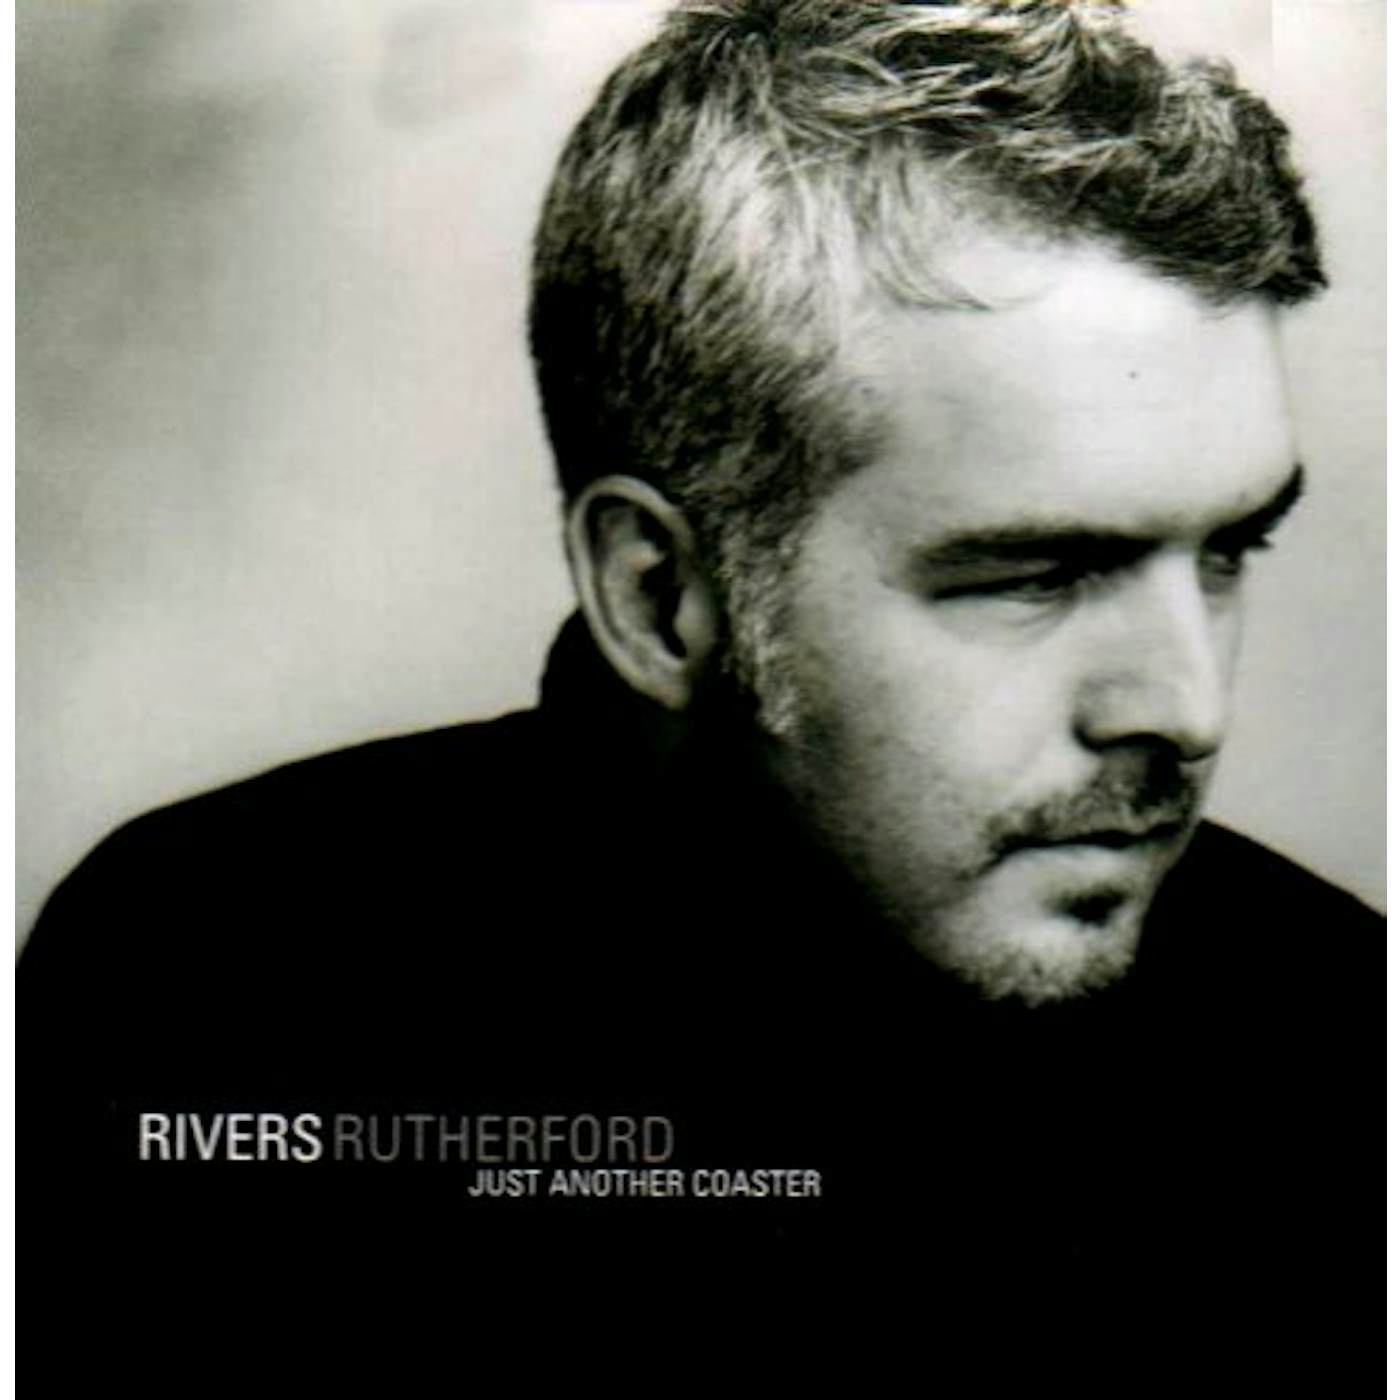 Rivers Rutherford JUST ANOTHER COASTER CD